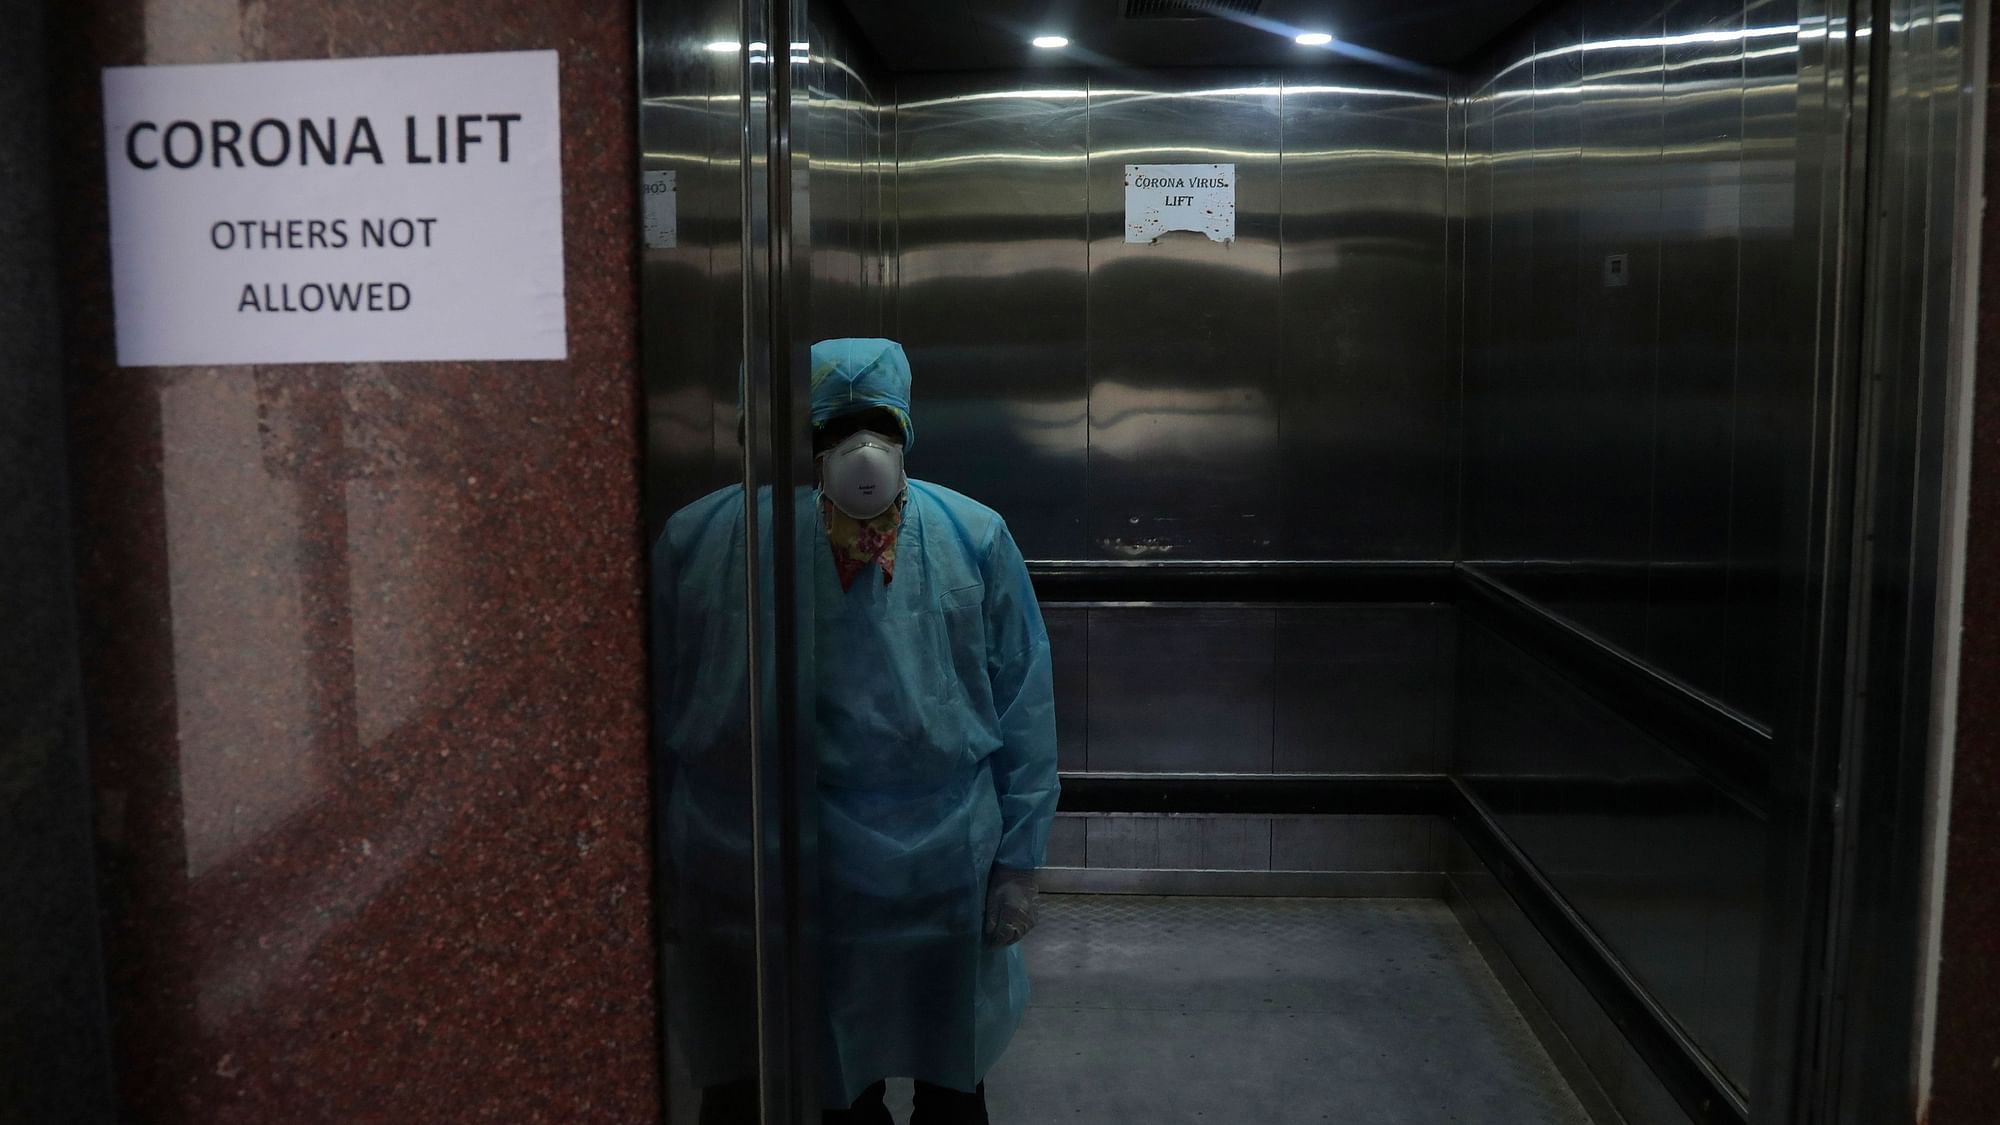 A lift operator stands inside a dedicated lift for people suspected to be infected with the new coronavirus. Representational image.